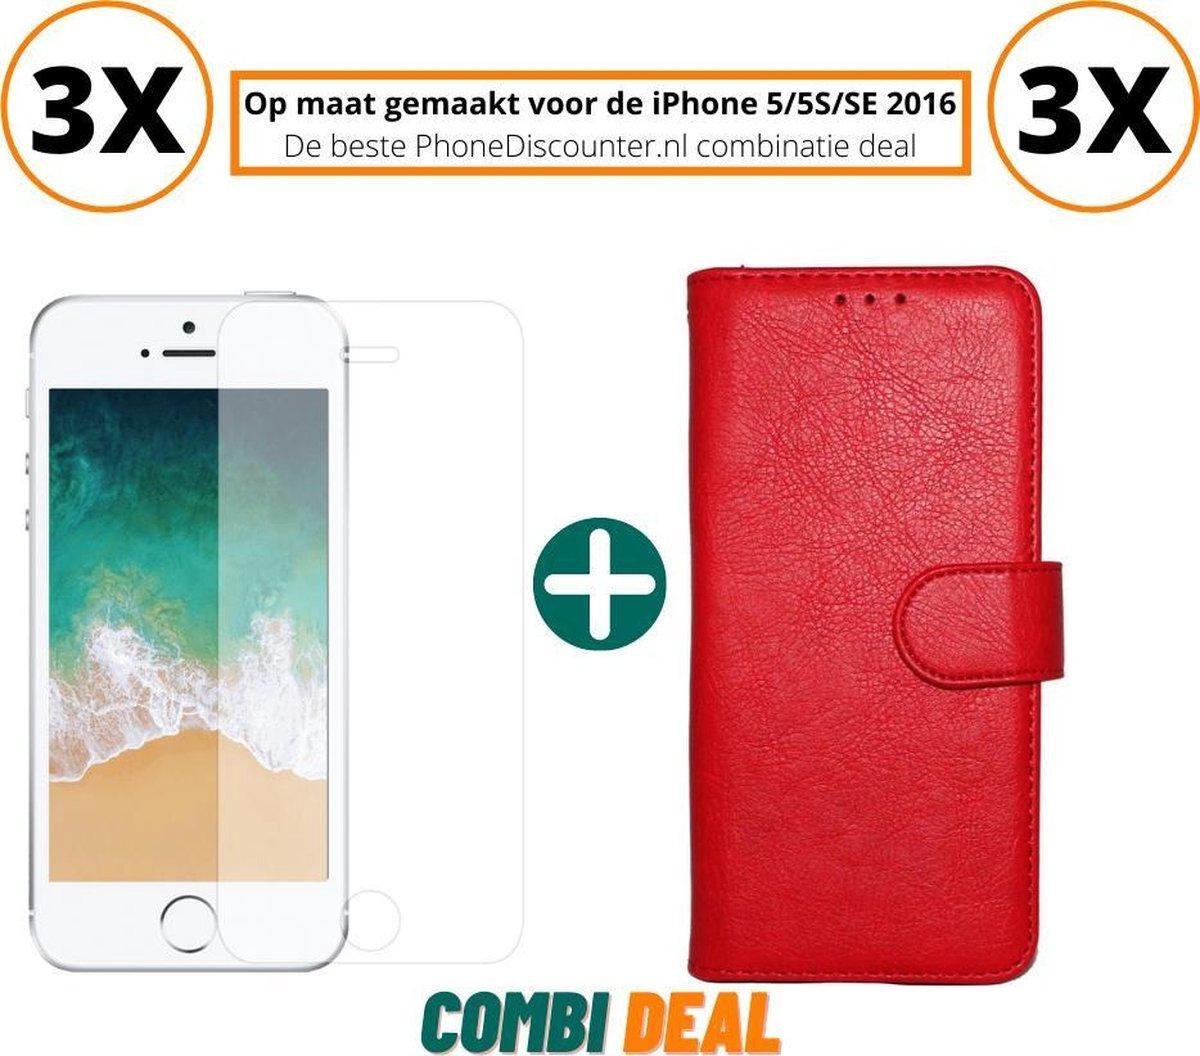 iphone 5s hoesje rood | iPhone 5S A1518 beschermhoes full body 3x | iPhone 5S wallet hoes rood | 3x hoesje iphone 5s apple | iPhone 5S boekhoesje + 3x iPhone 5S tempered glass screenprotector